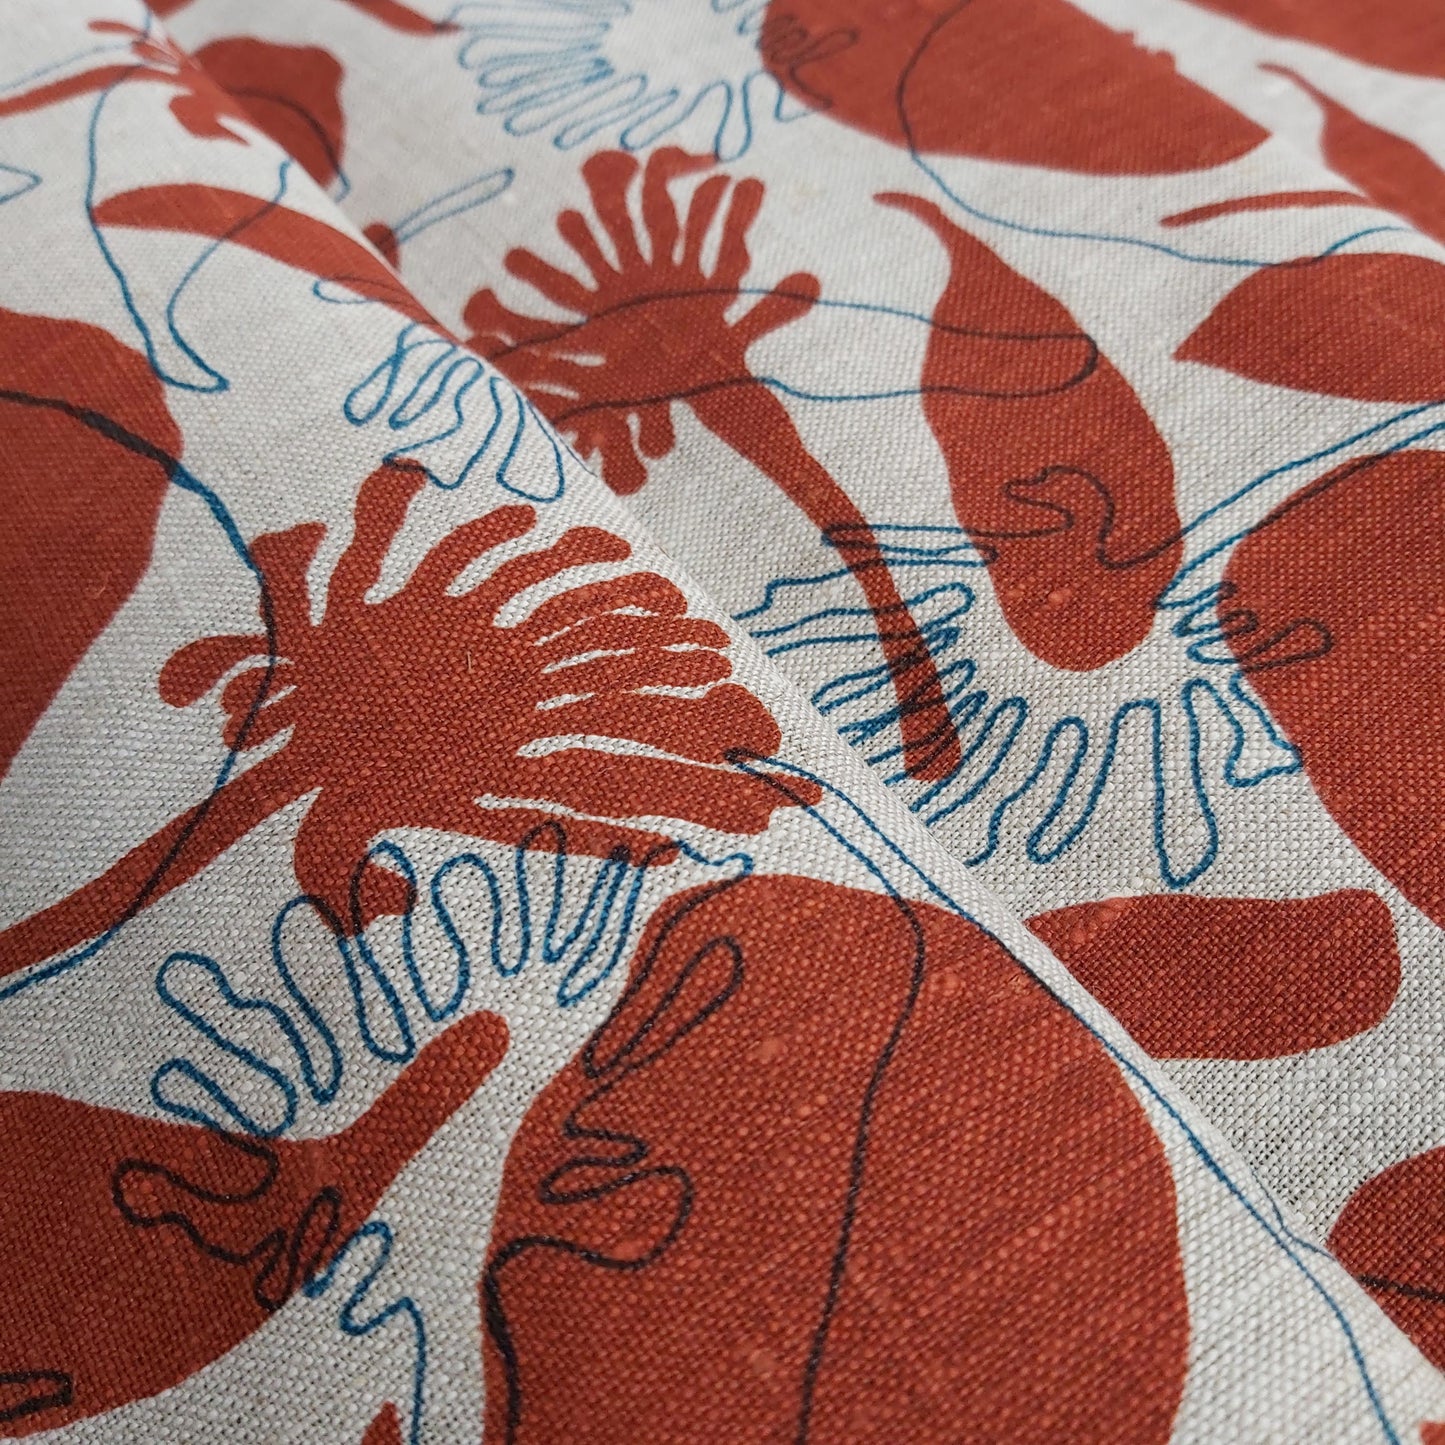 Linen oatmeal fabric screenprinted with seedpods design in redwood and sea blue. Printed and designed in Melbourne by textile designer Femke Textiles.